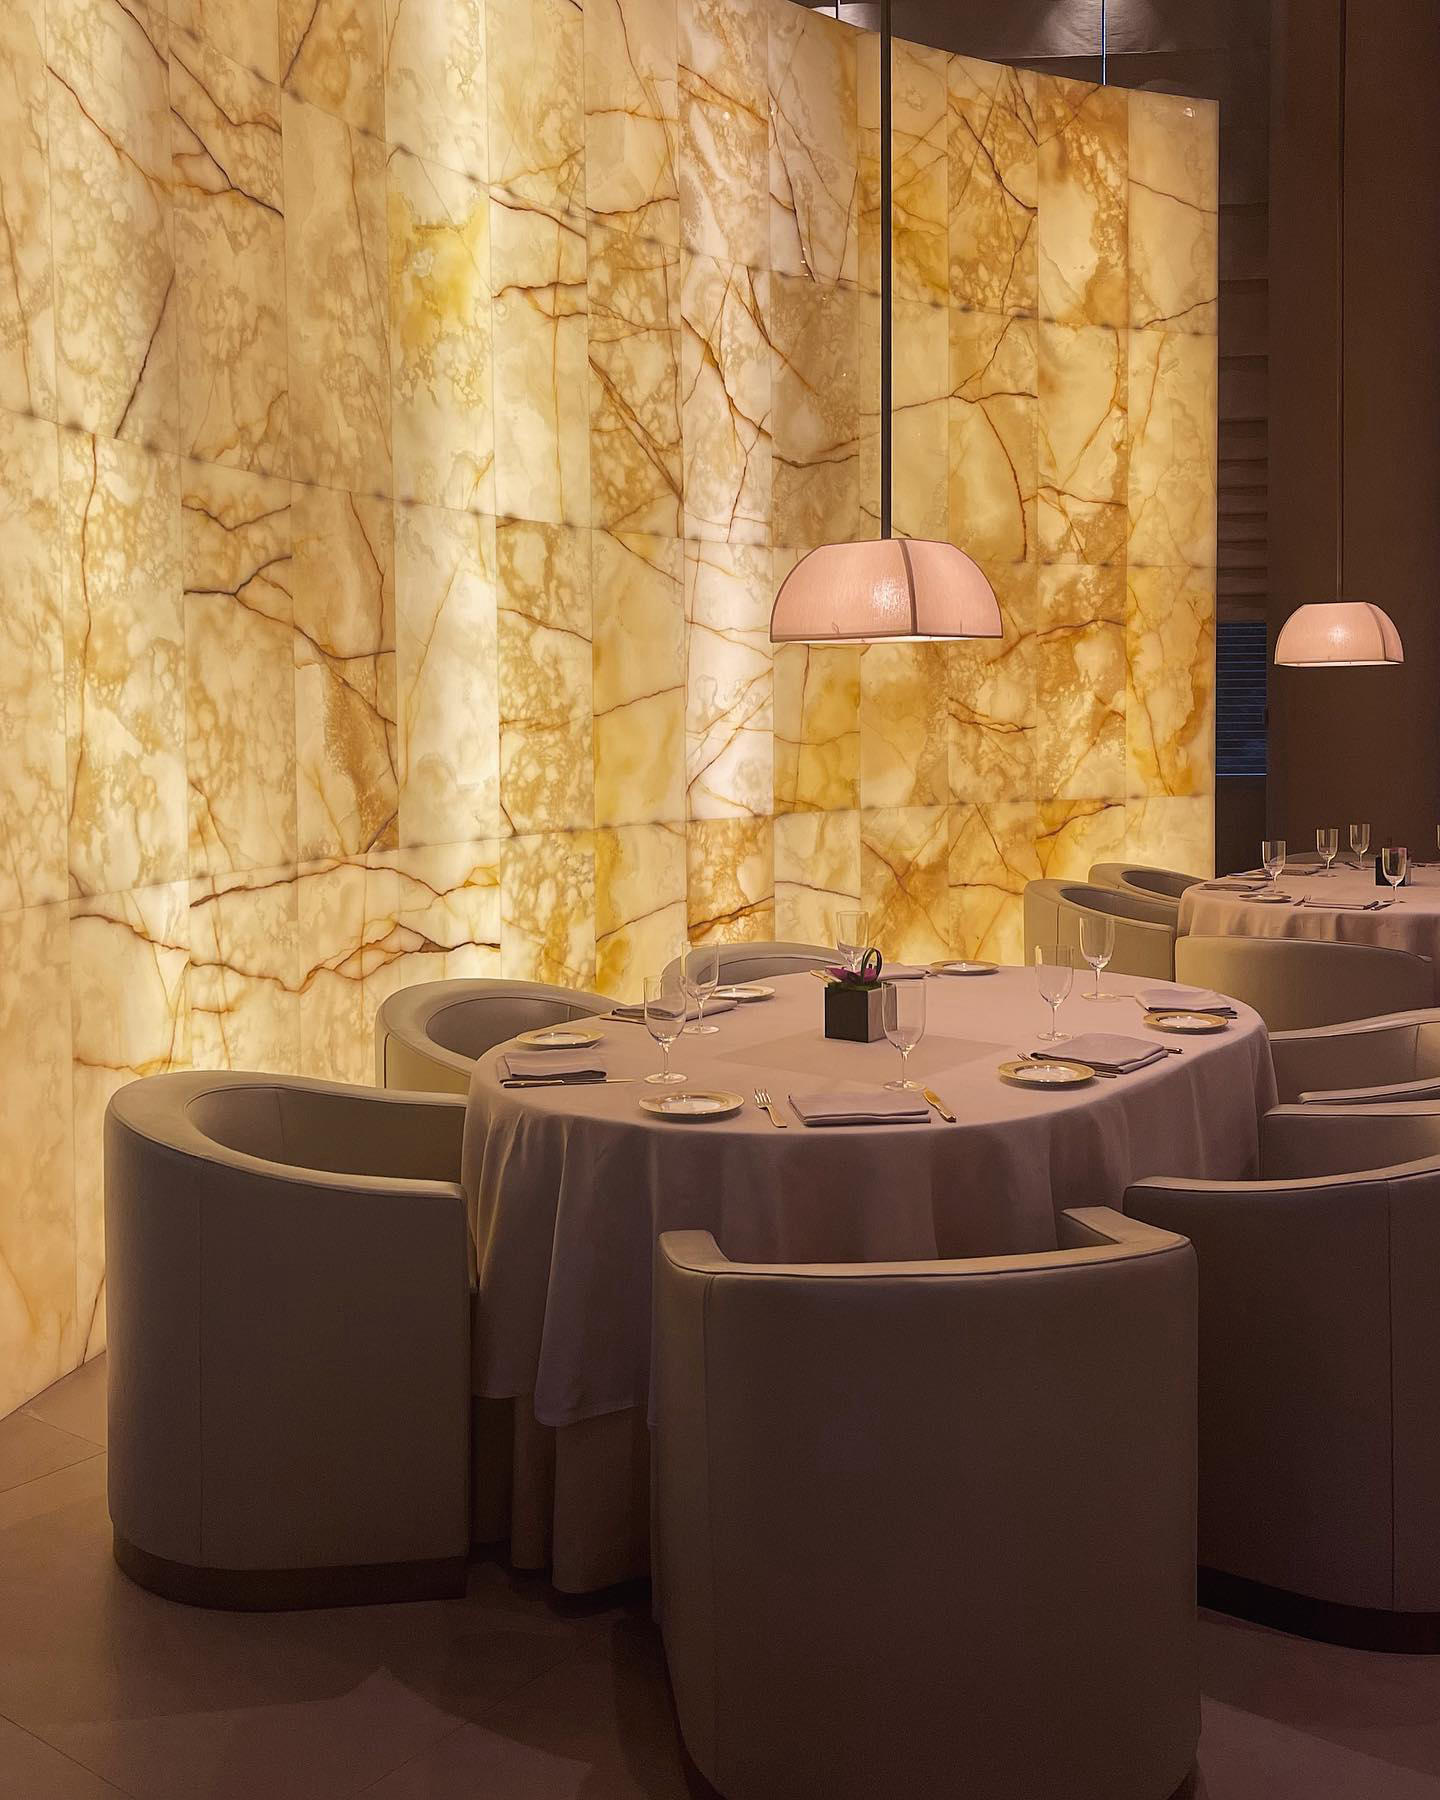 Armani Hotel Dubai - Italian culinary experience is paired with uniquely personalized service in Arm